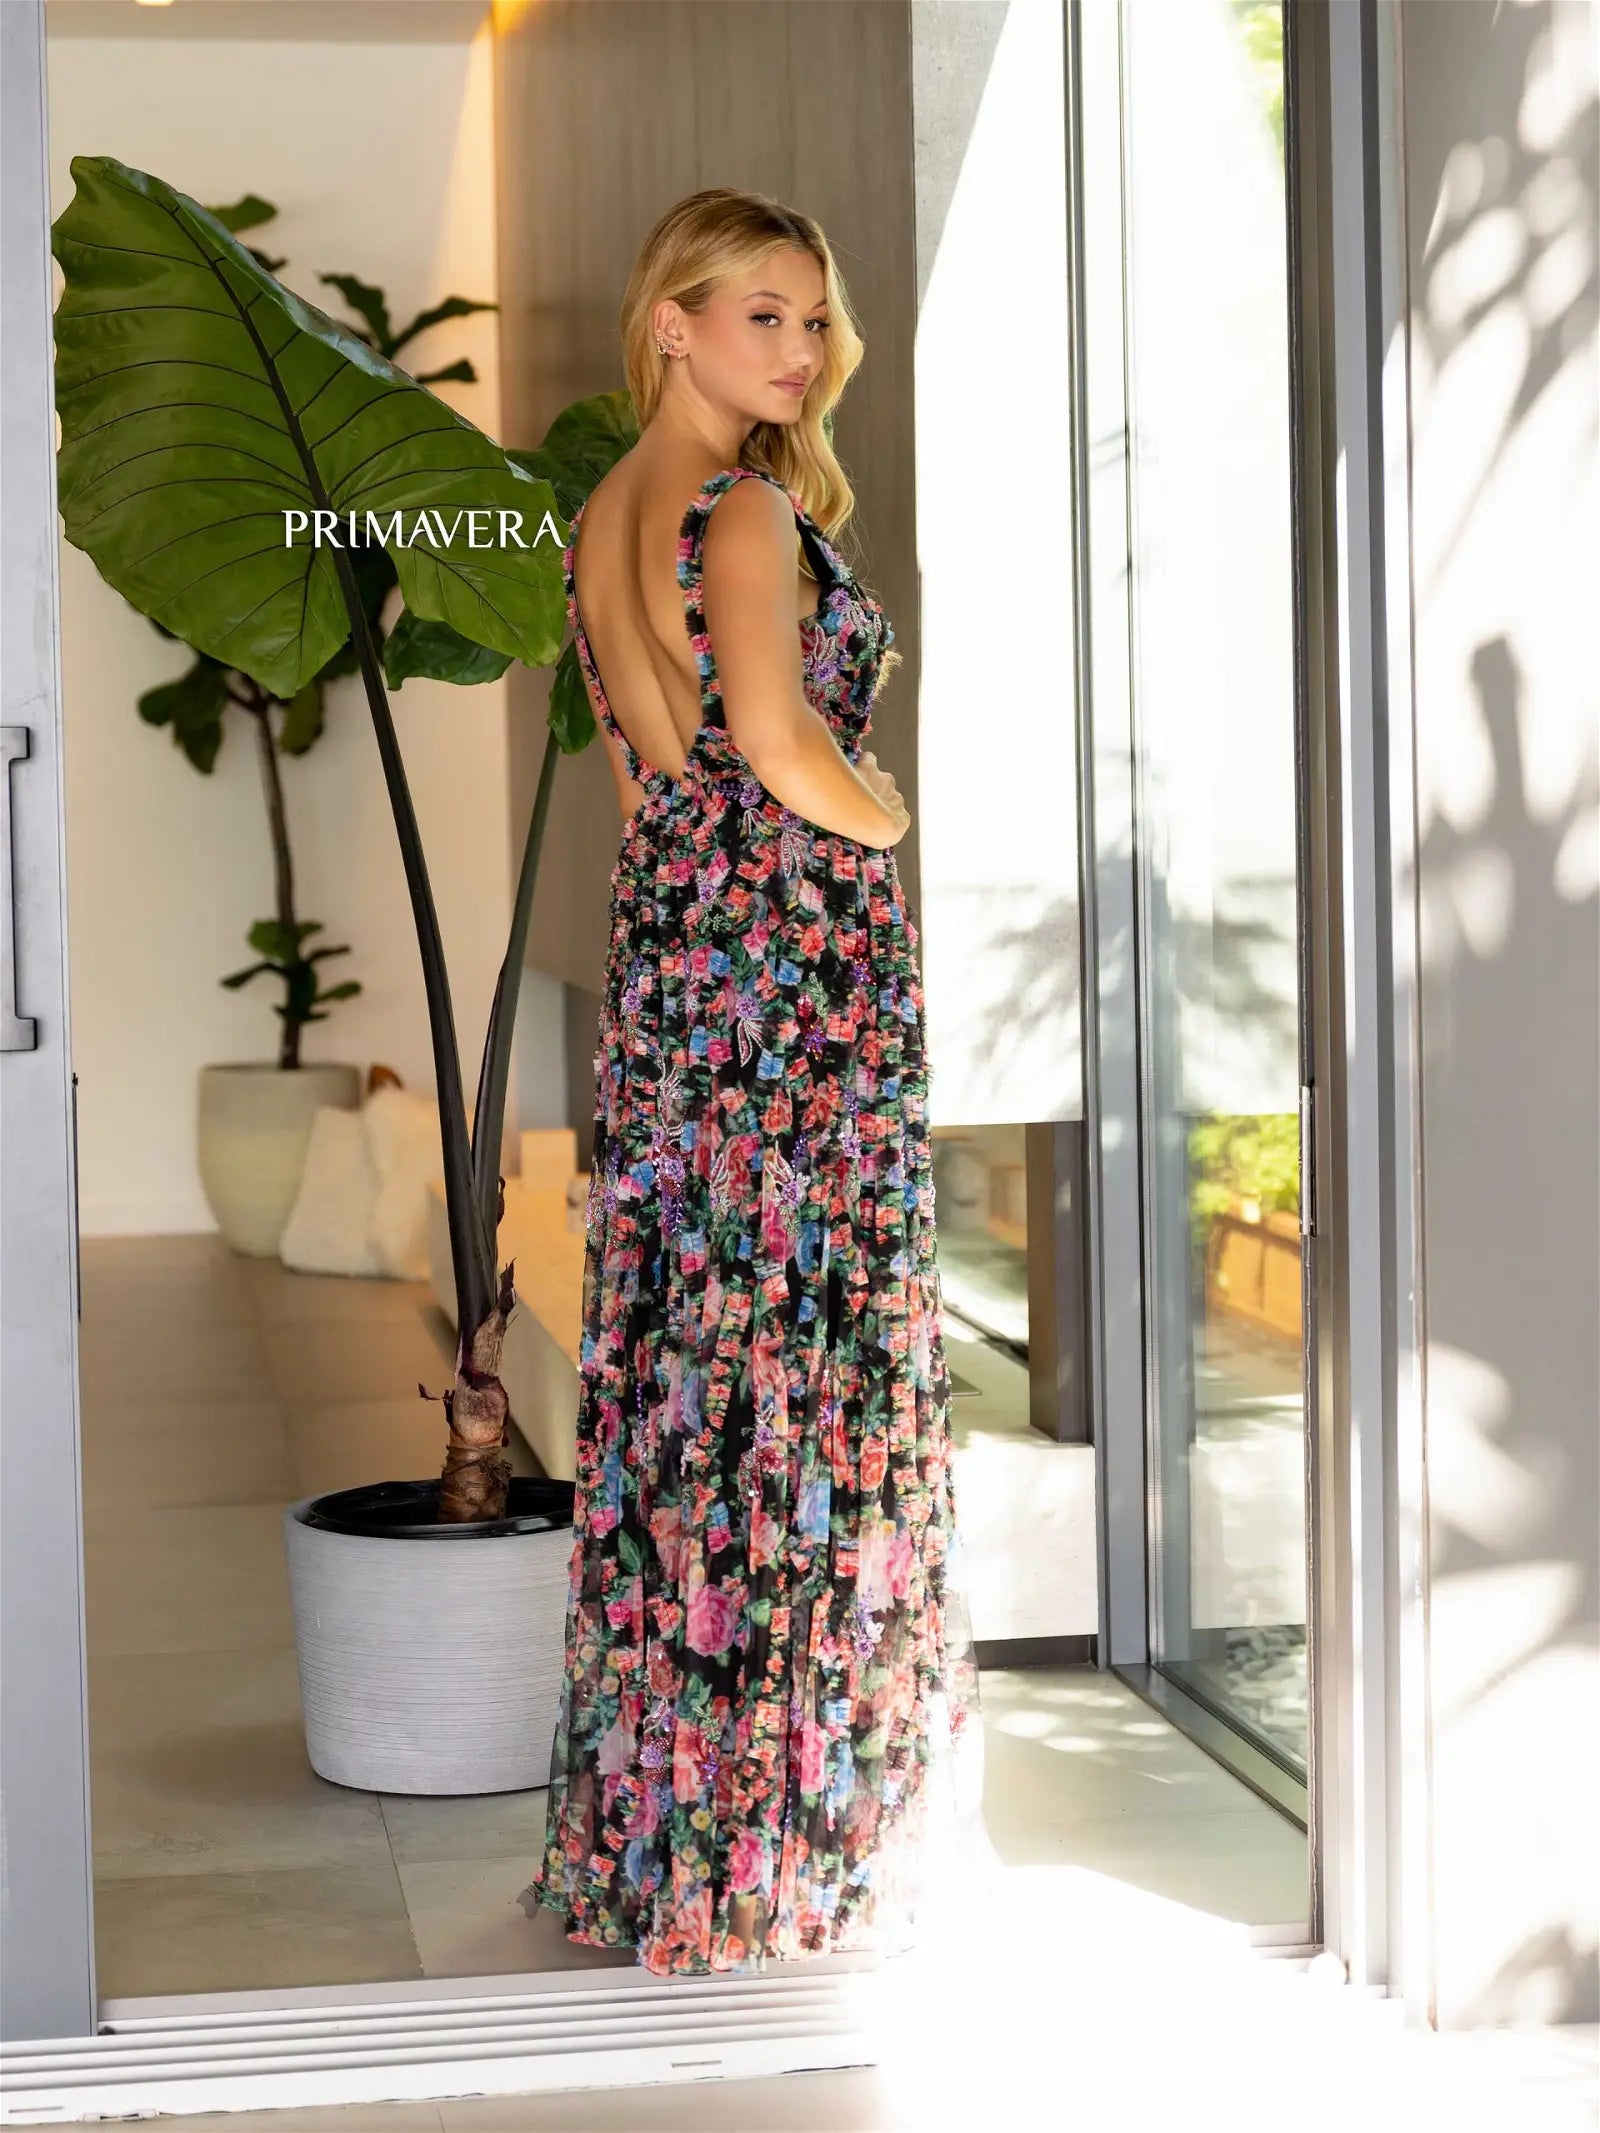 Elevate your style with the stunning Primavera Couture 4167 Long Prom Dress. This floral print gown features intricate beading, a fitted body, and a high slit for a glamorous and sophisticated look. Stand out at any formal event with this elegant and eye-catching dress.